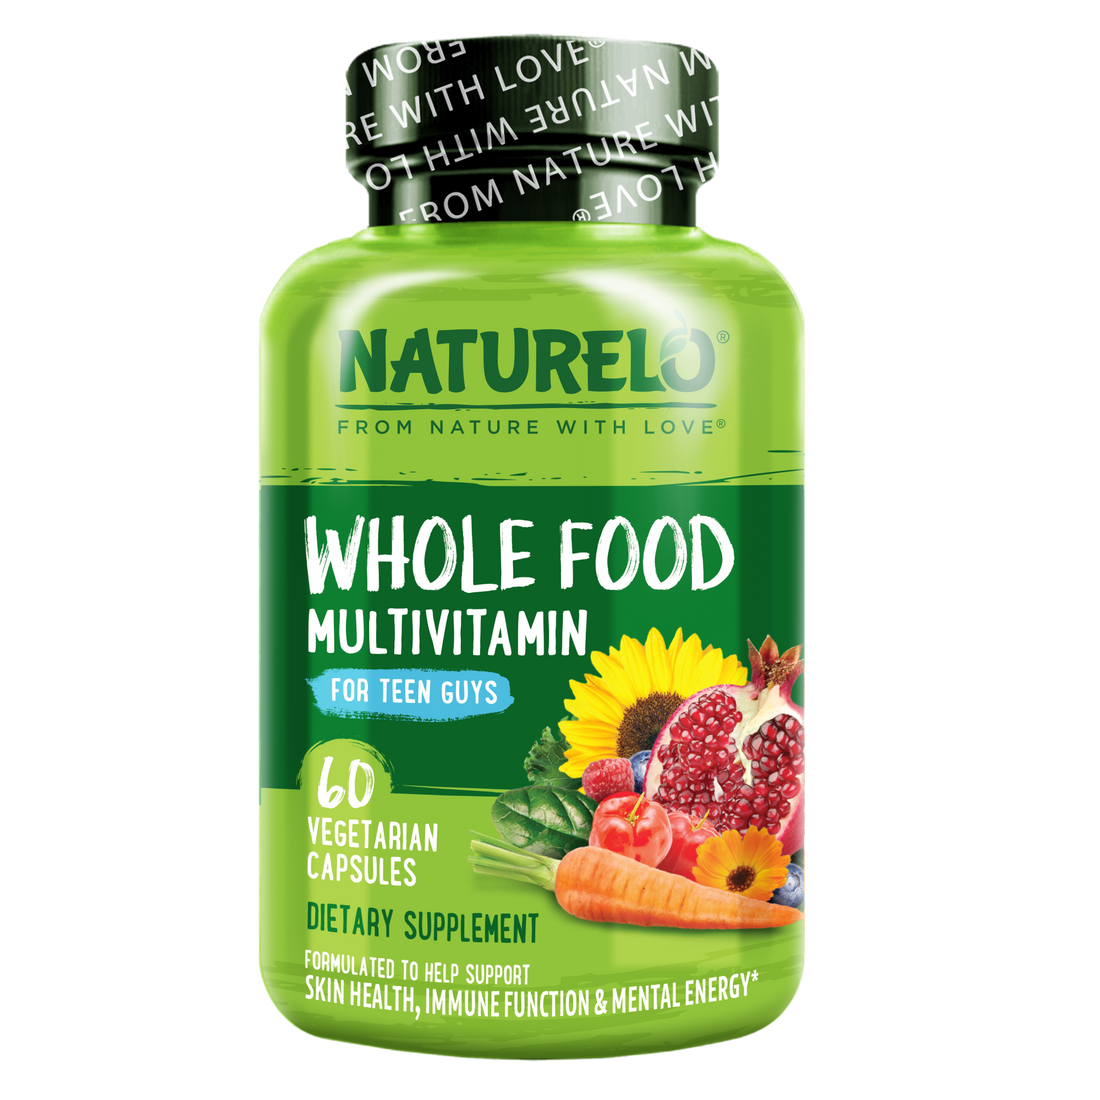 Whole Food Multivitamin for Teen Boys, Plant-Based and Vegan Friendly